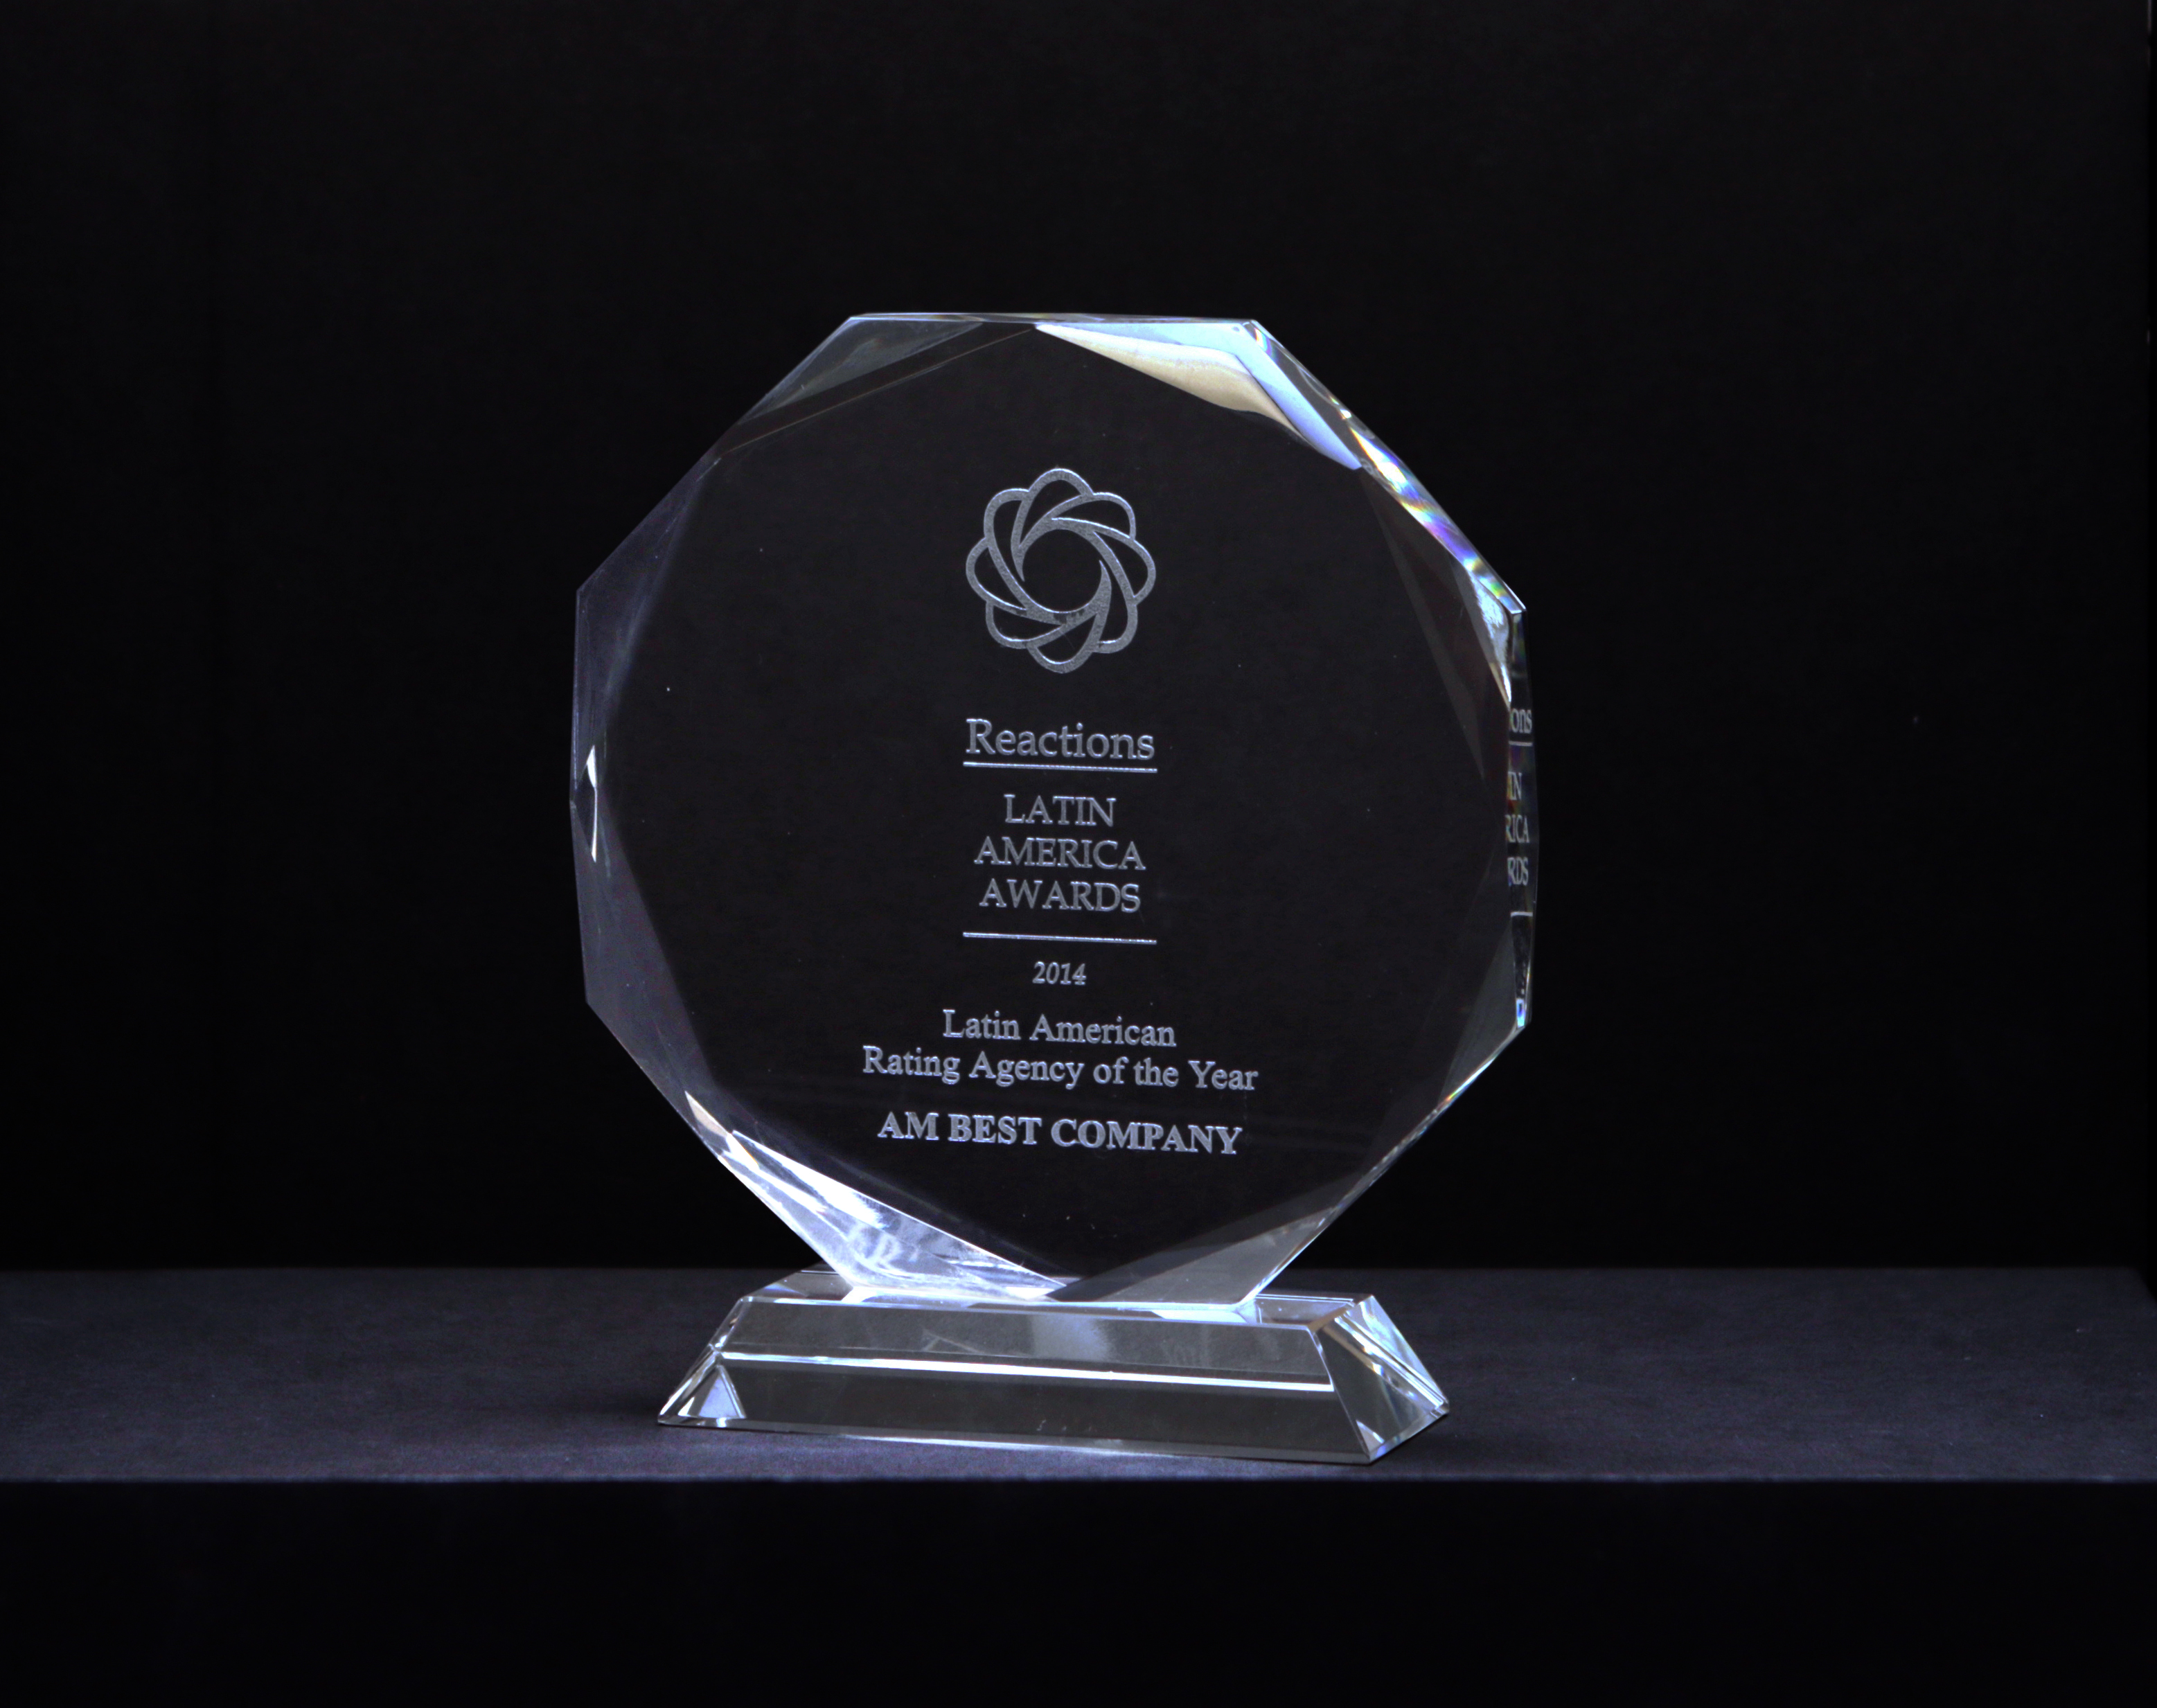 Latin America Rating Agency of the Year